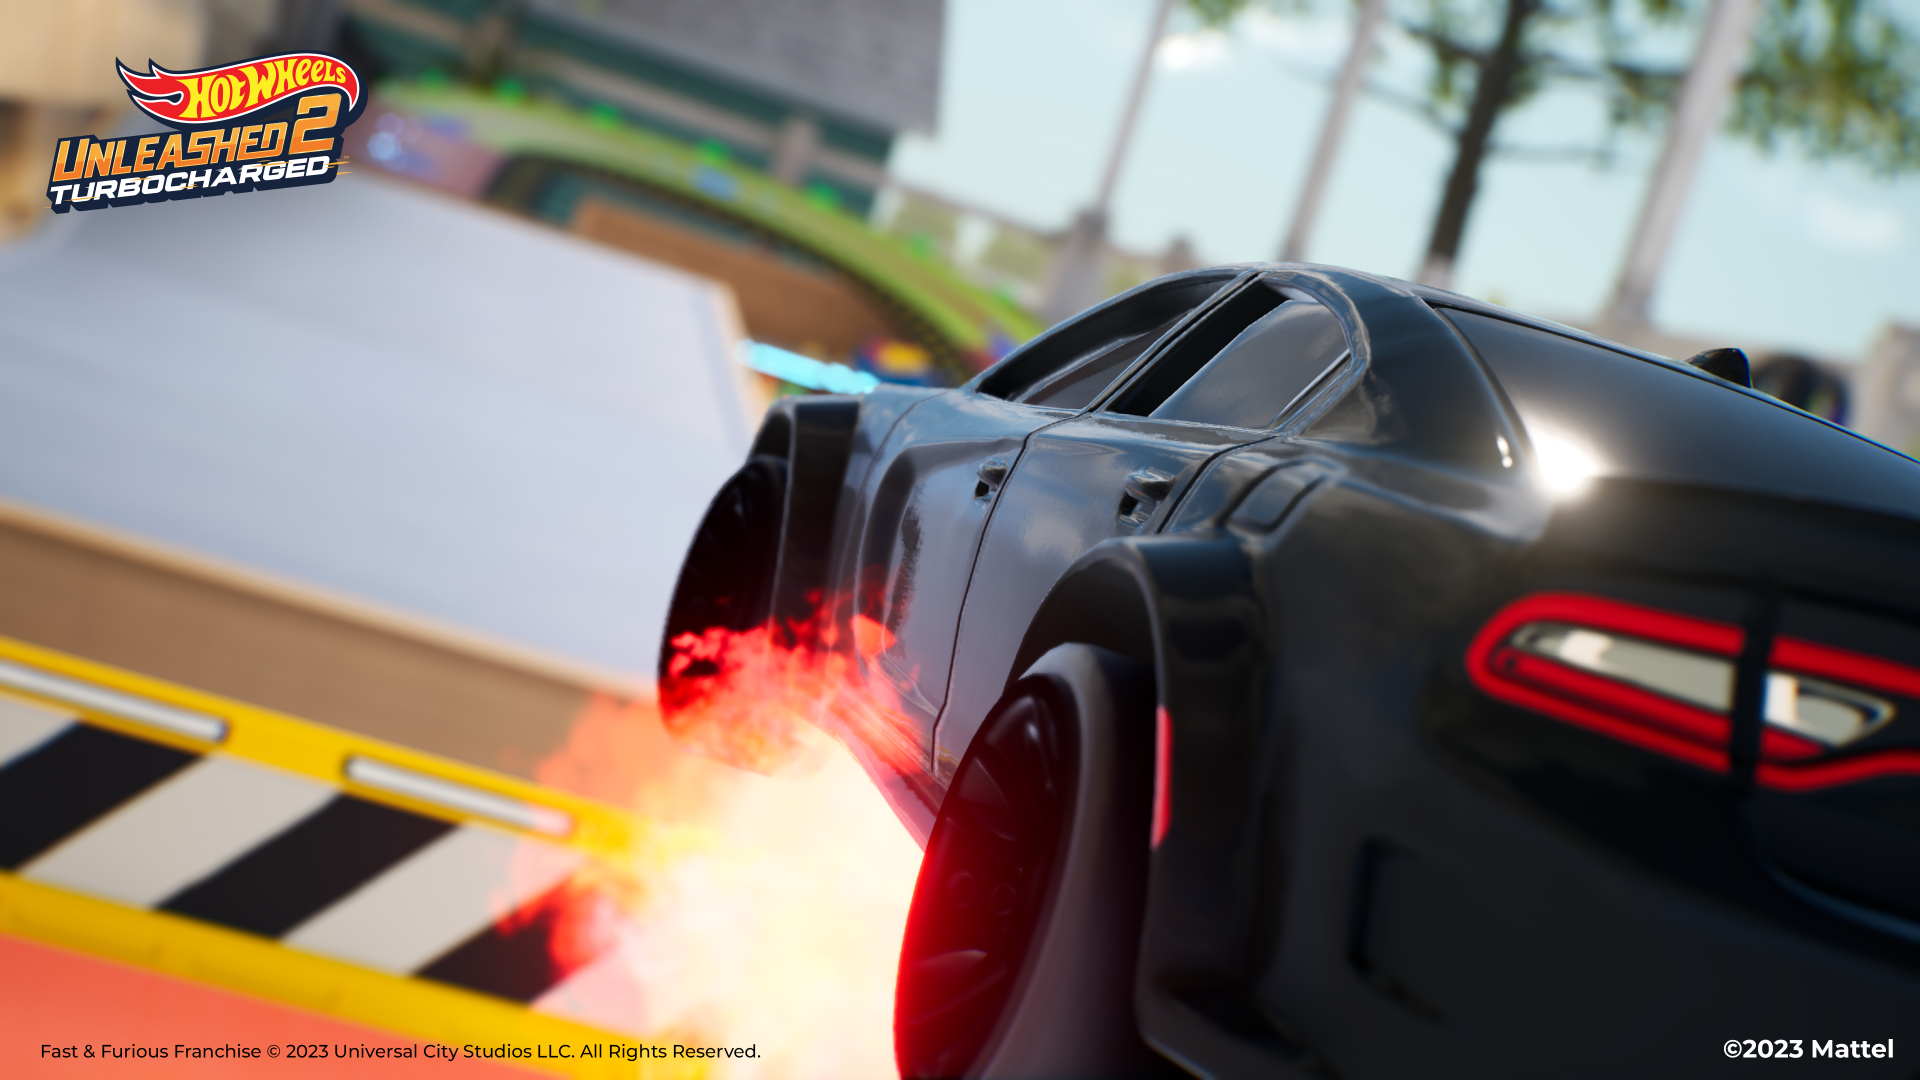 Hot Wheels Unleashed 2 – Turbocharged is Out Now